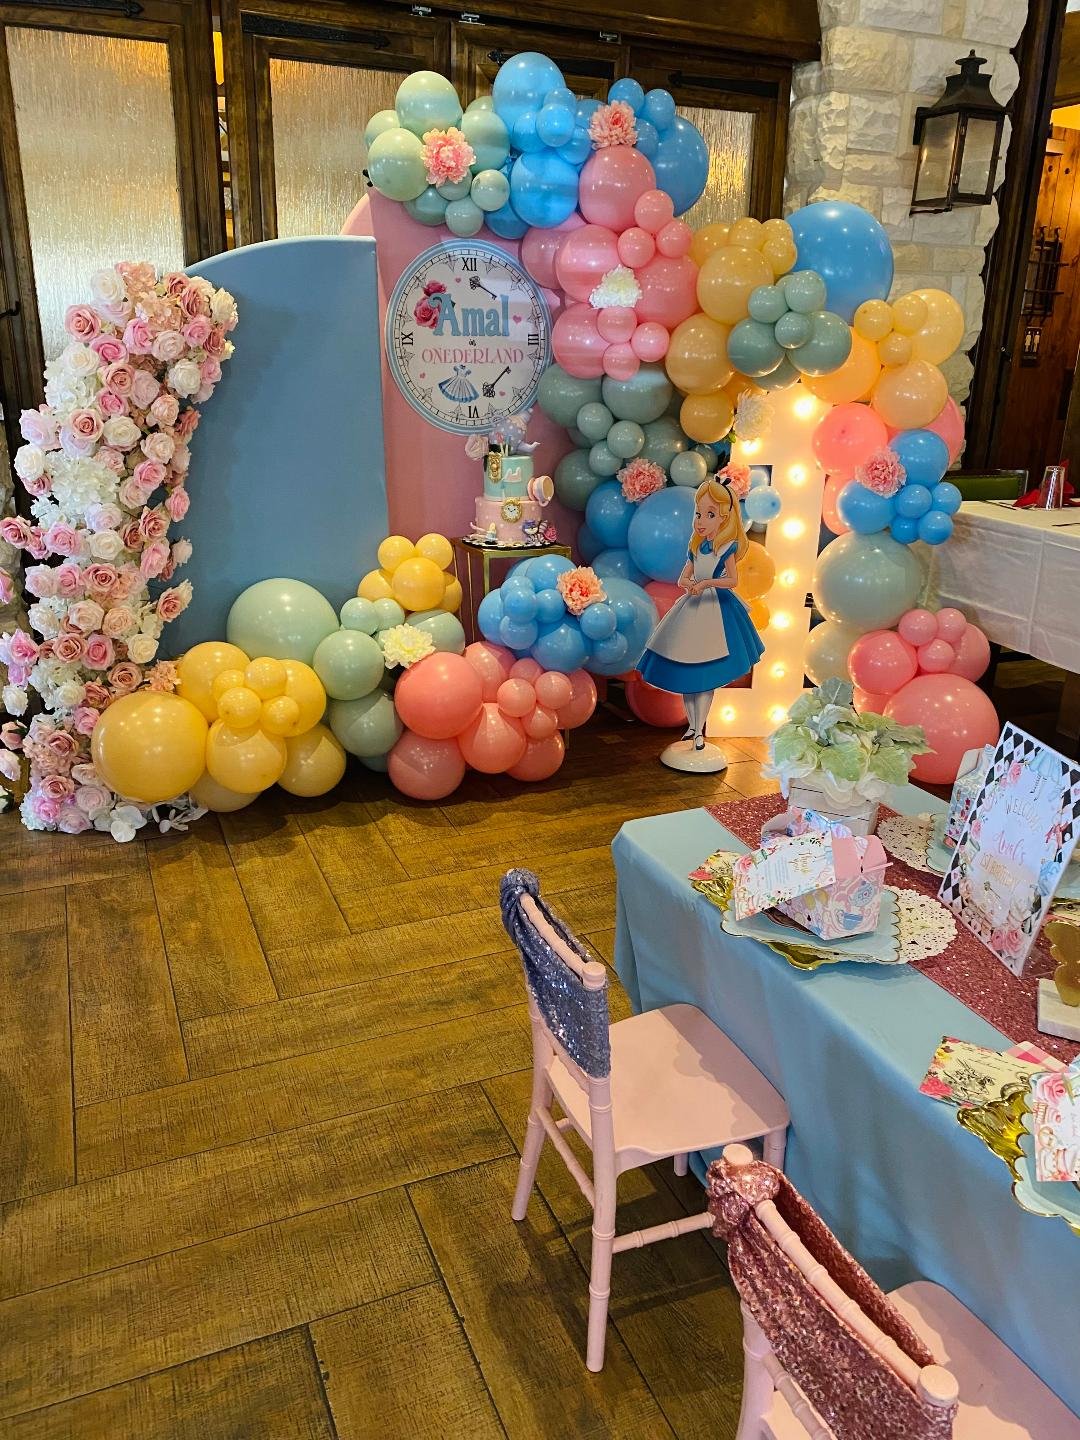 houston kids birthday party balloons backdrops childrens parties play.jpg